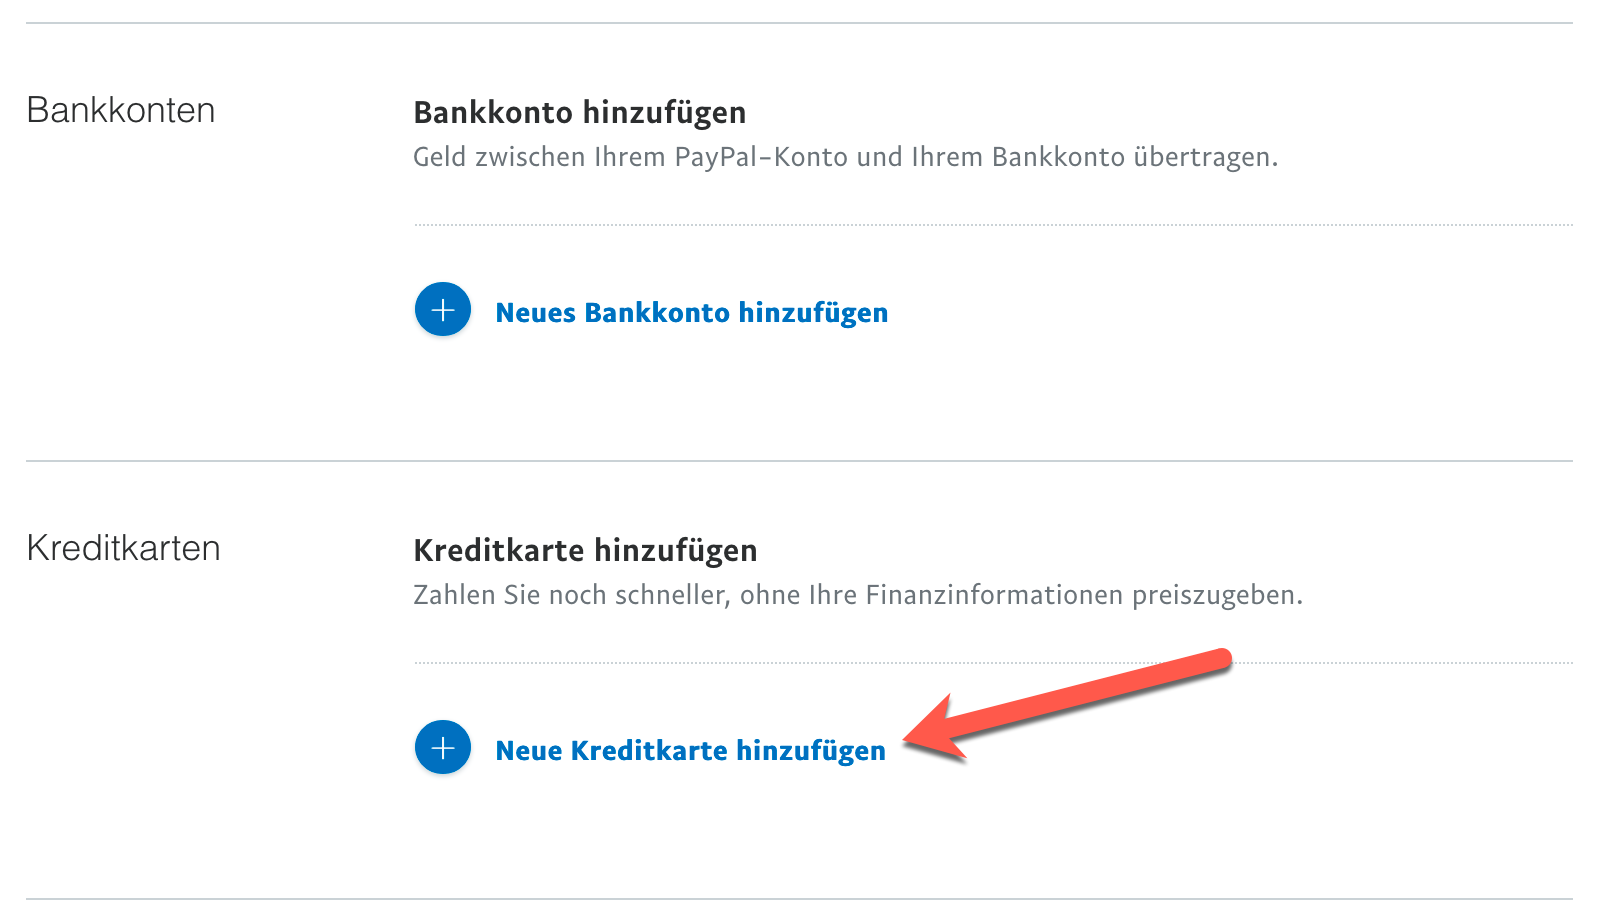 [PayPal Guide] How to Link a Bank Account - PayPal